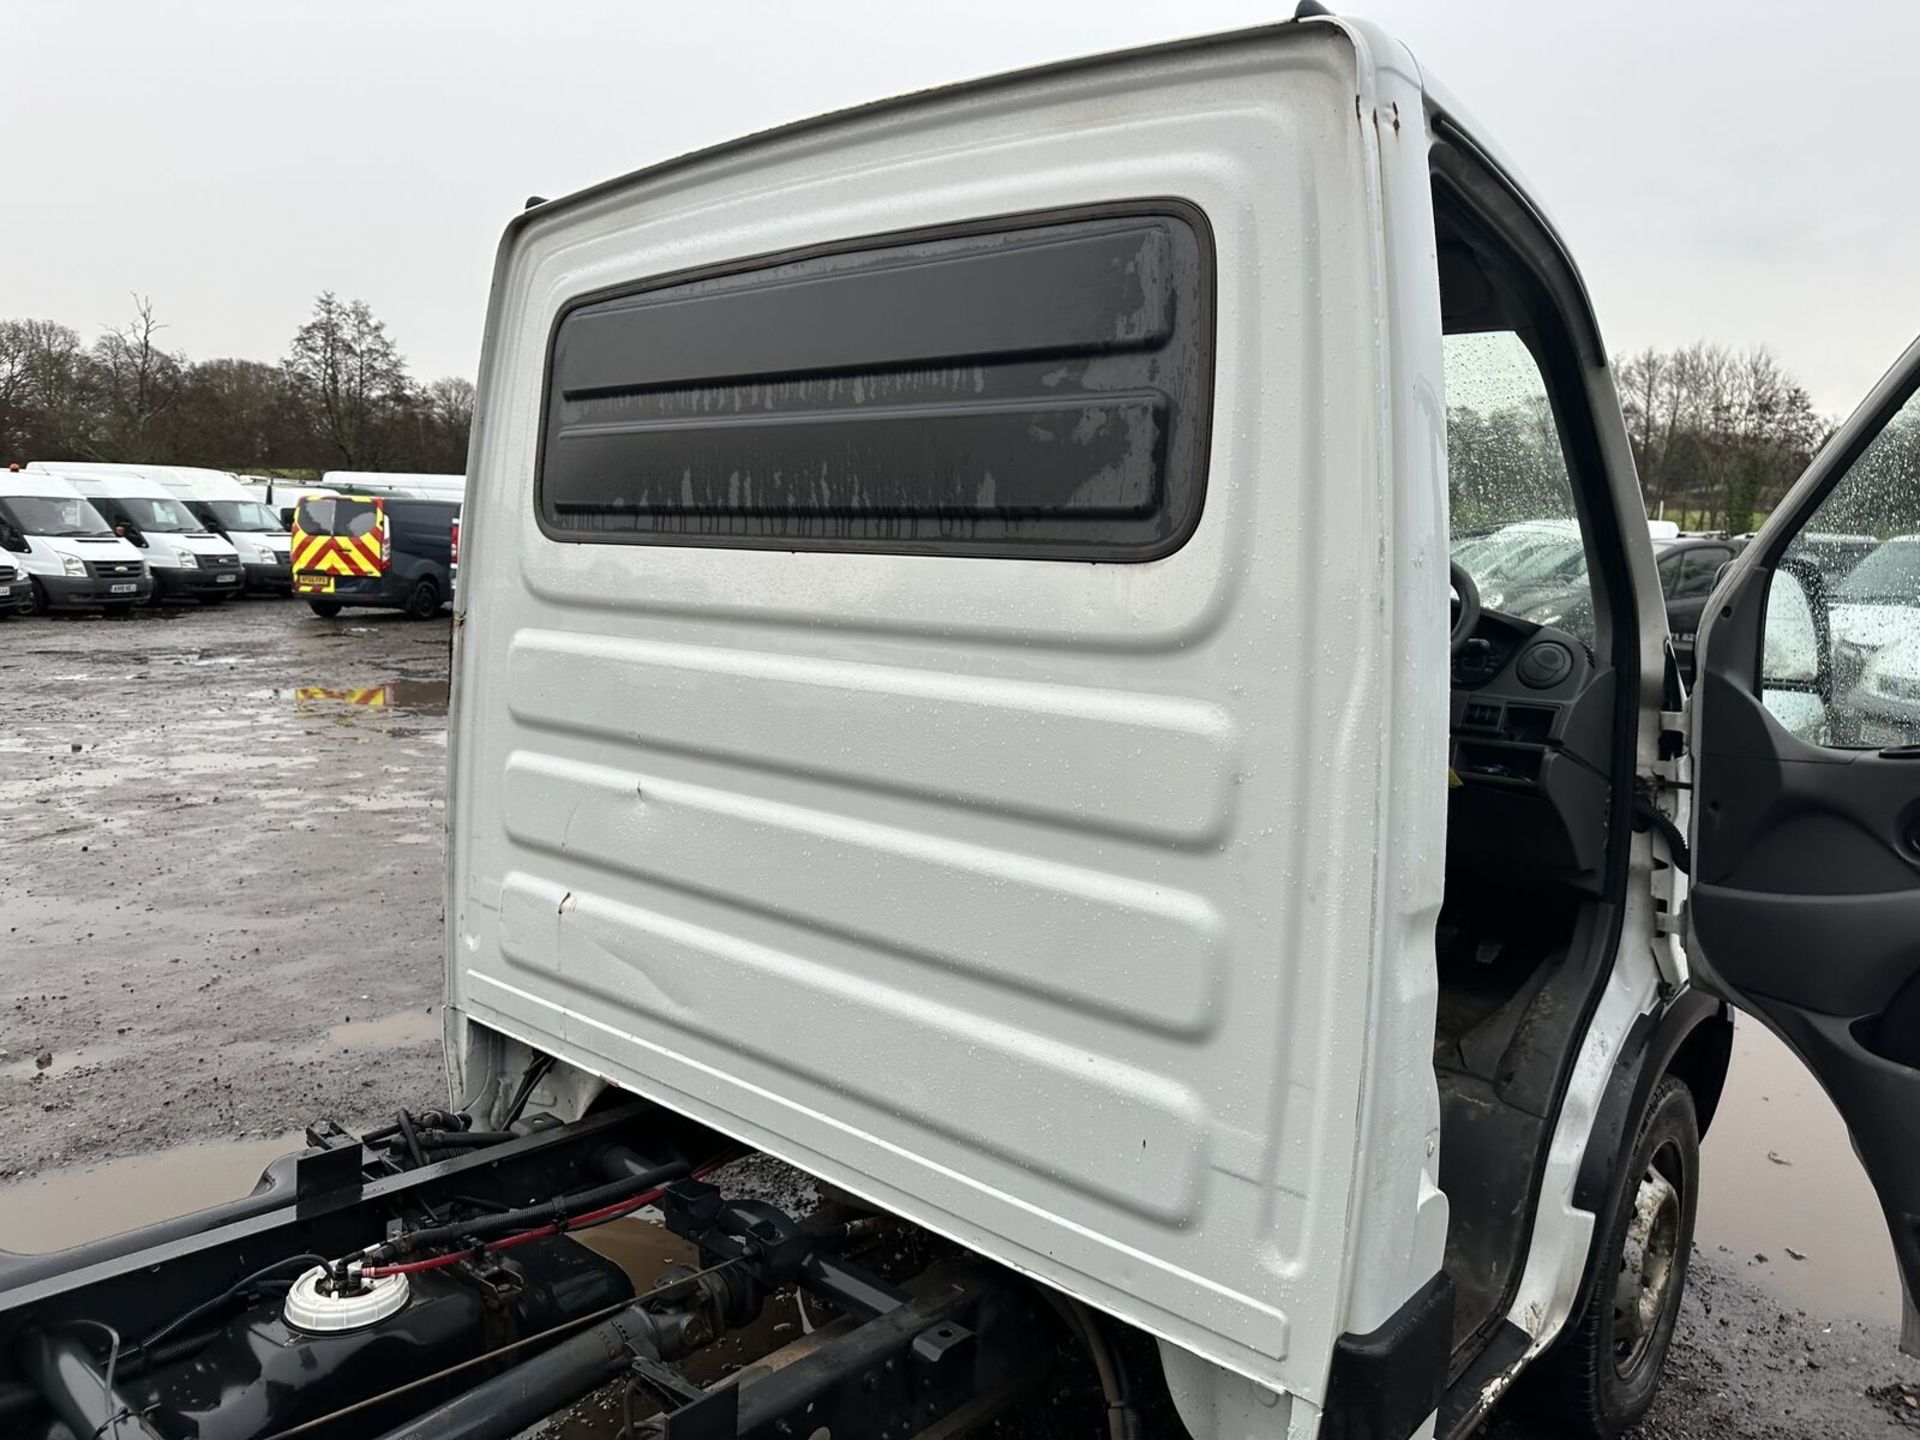 DEAL ALERT: 60 PLATE IVECO DAILY, AUTOMATIC, CLEAN BODY, GEAR ISSUE >>--NO VAT ON HAMMER--<< - Image 5 of 11